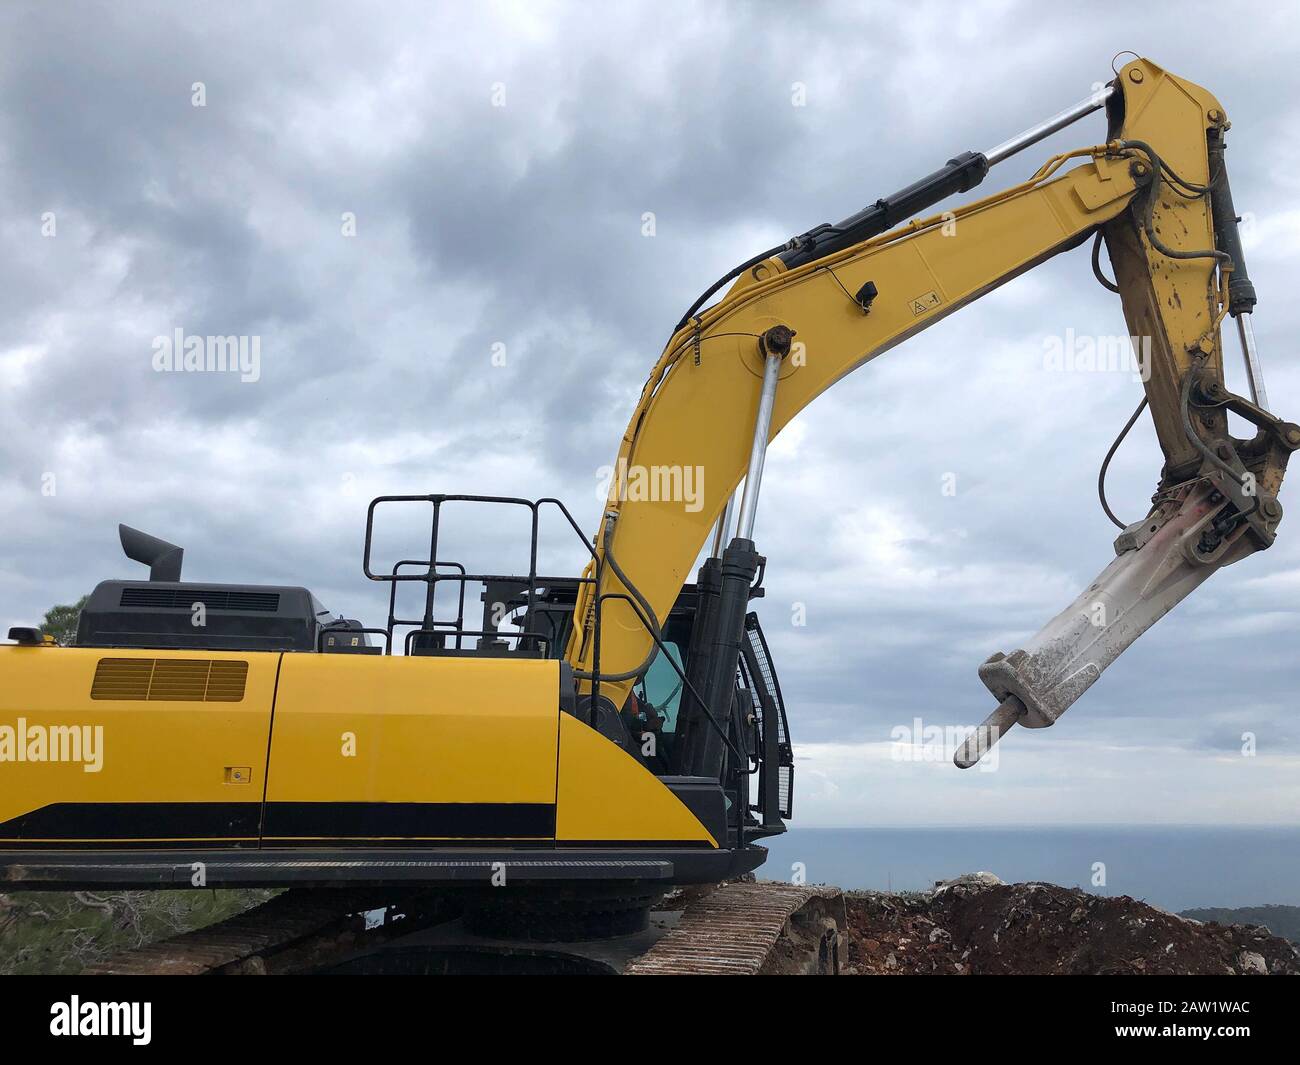 Hydrohammer during road construction works on the rocky soils. Heavy machinery at earthmoving, digging, excavation operations. Stock Photo